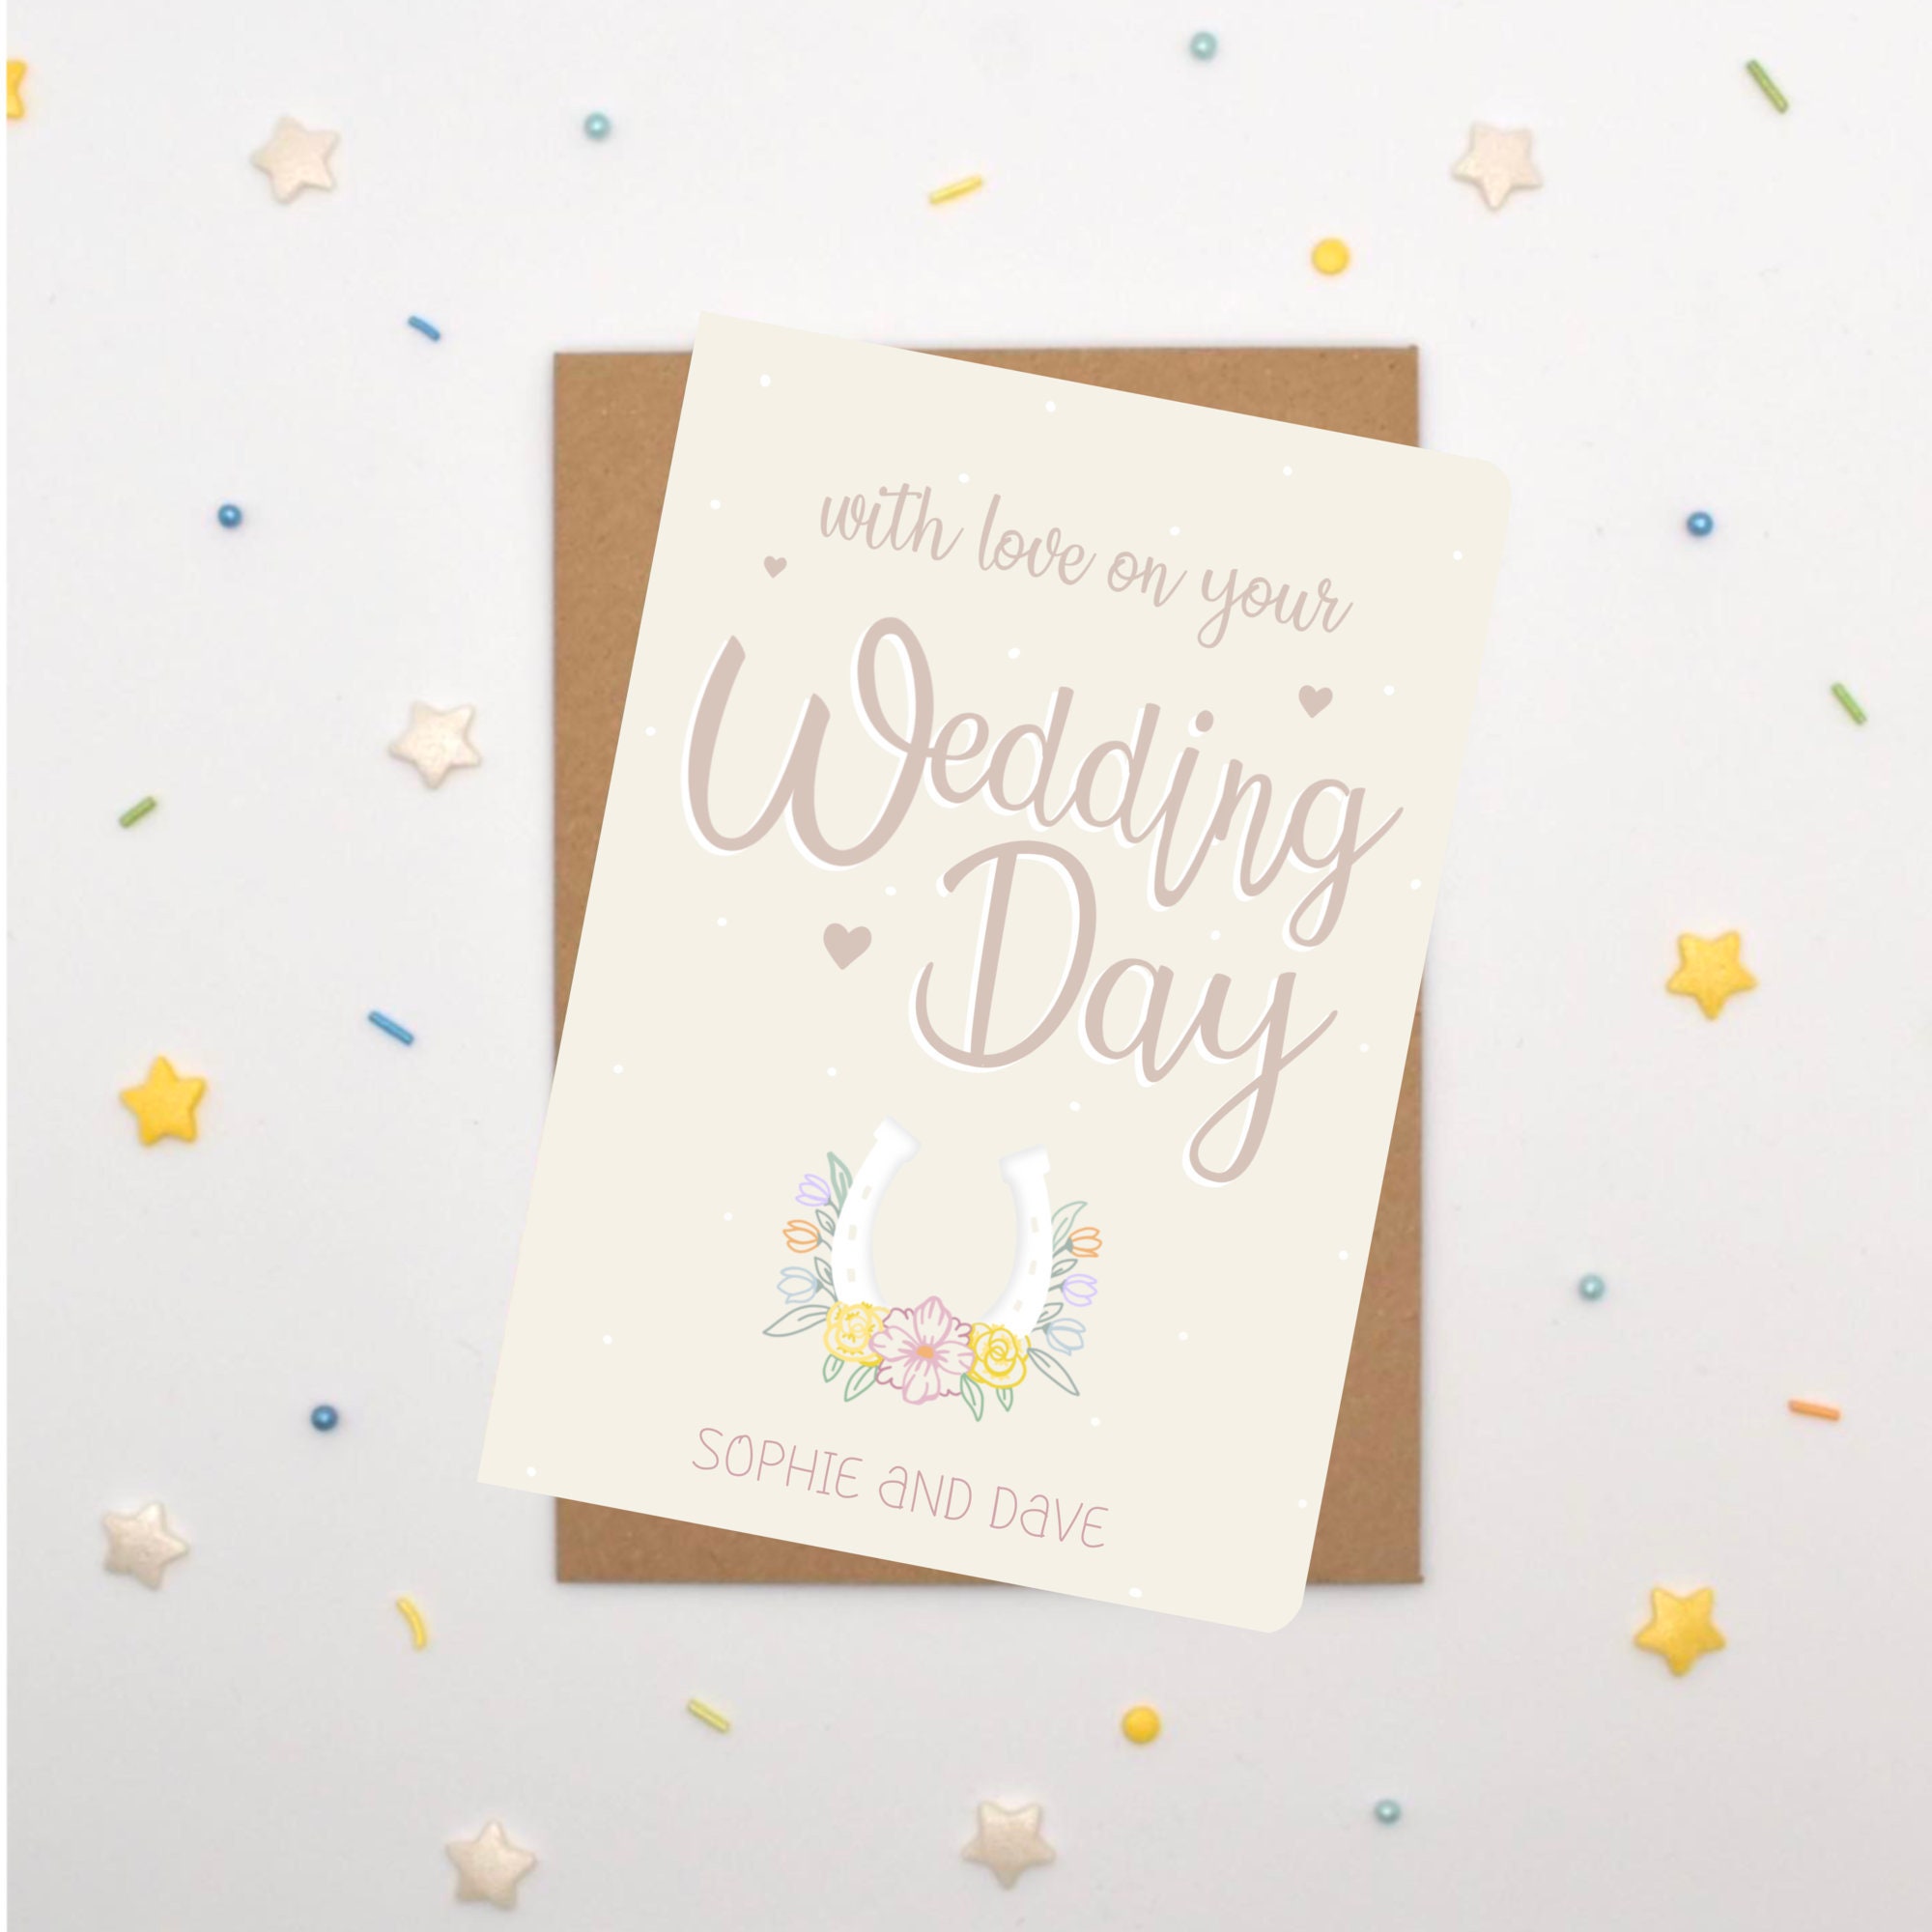 With Love On Your Wedding Day Greetings Card A6 size